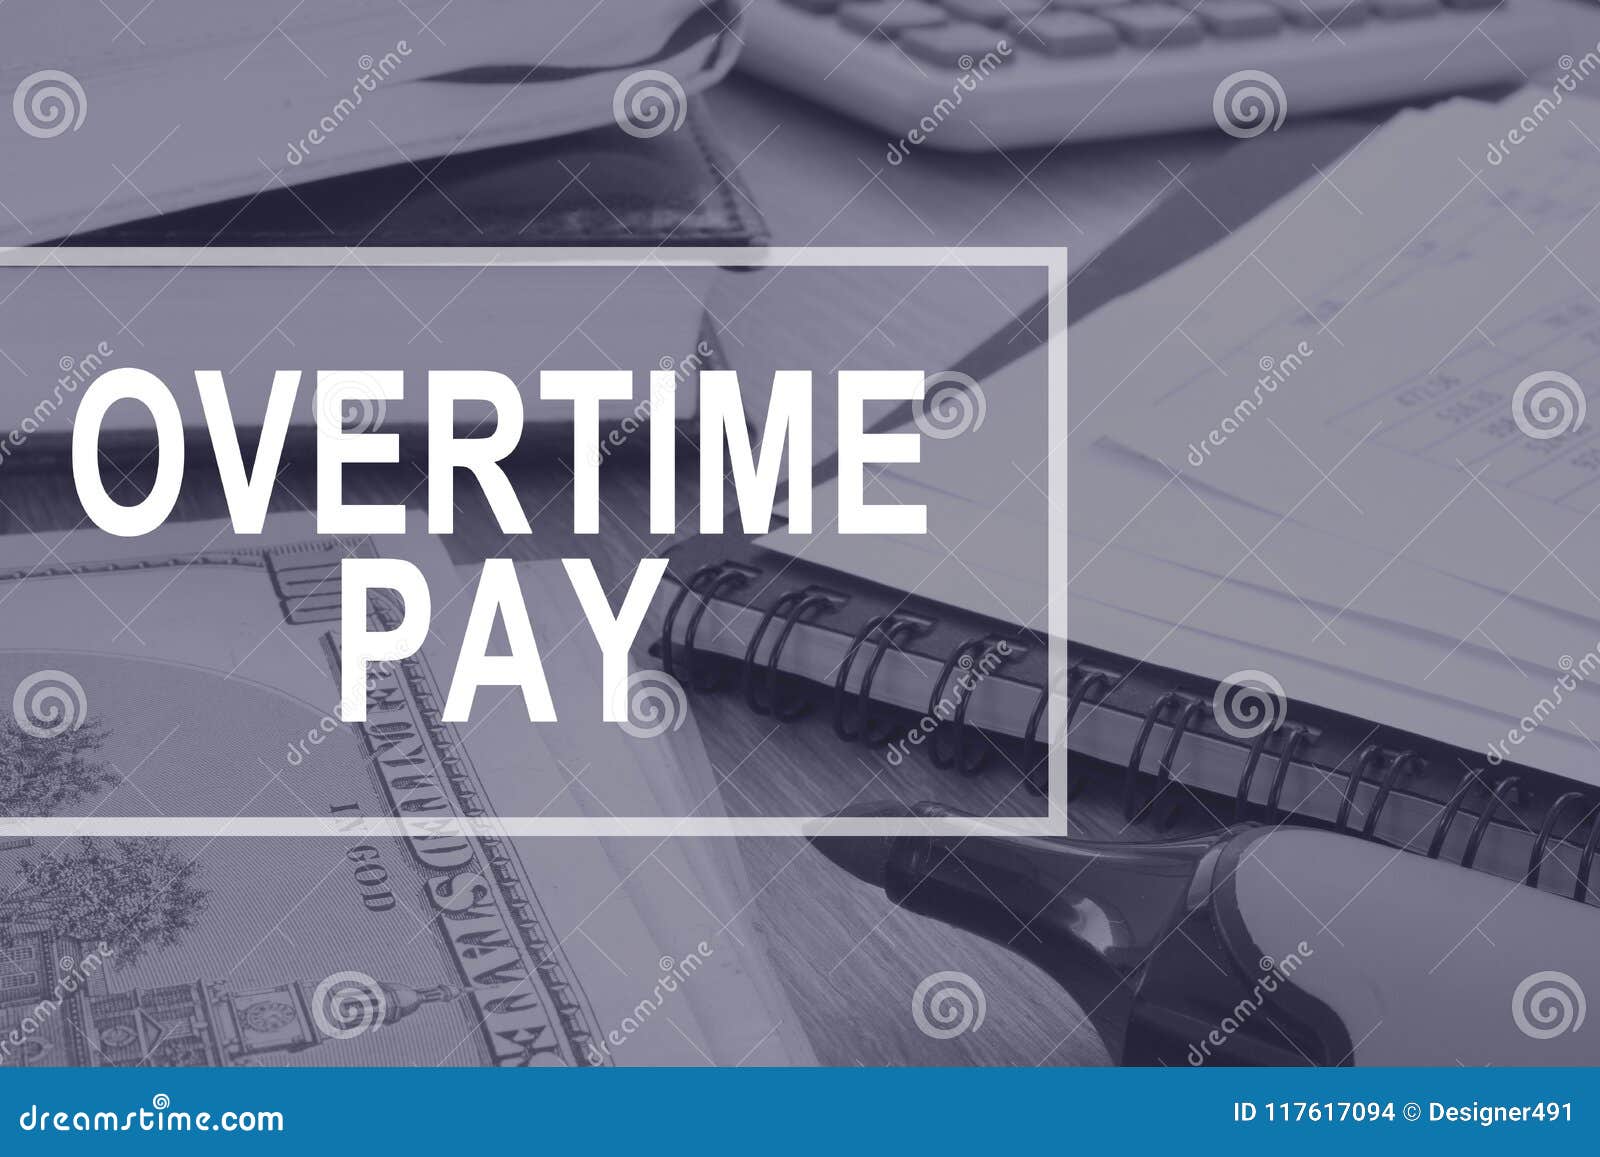 overtime pay. office desk with calculator and documents.